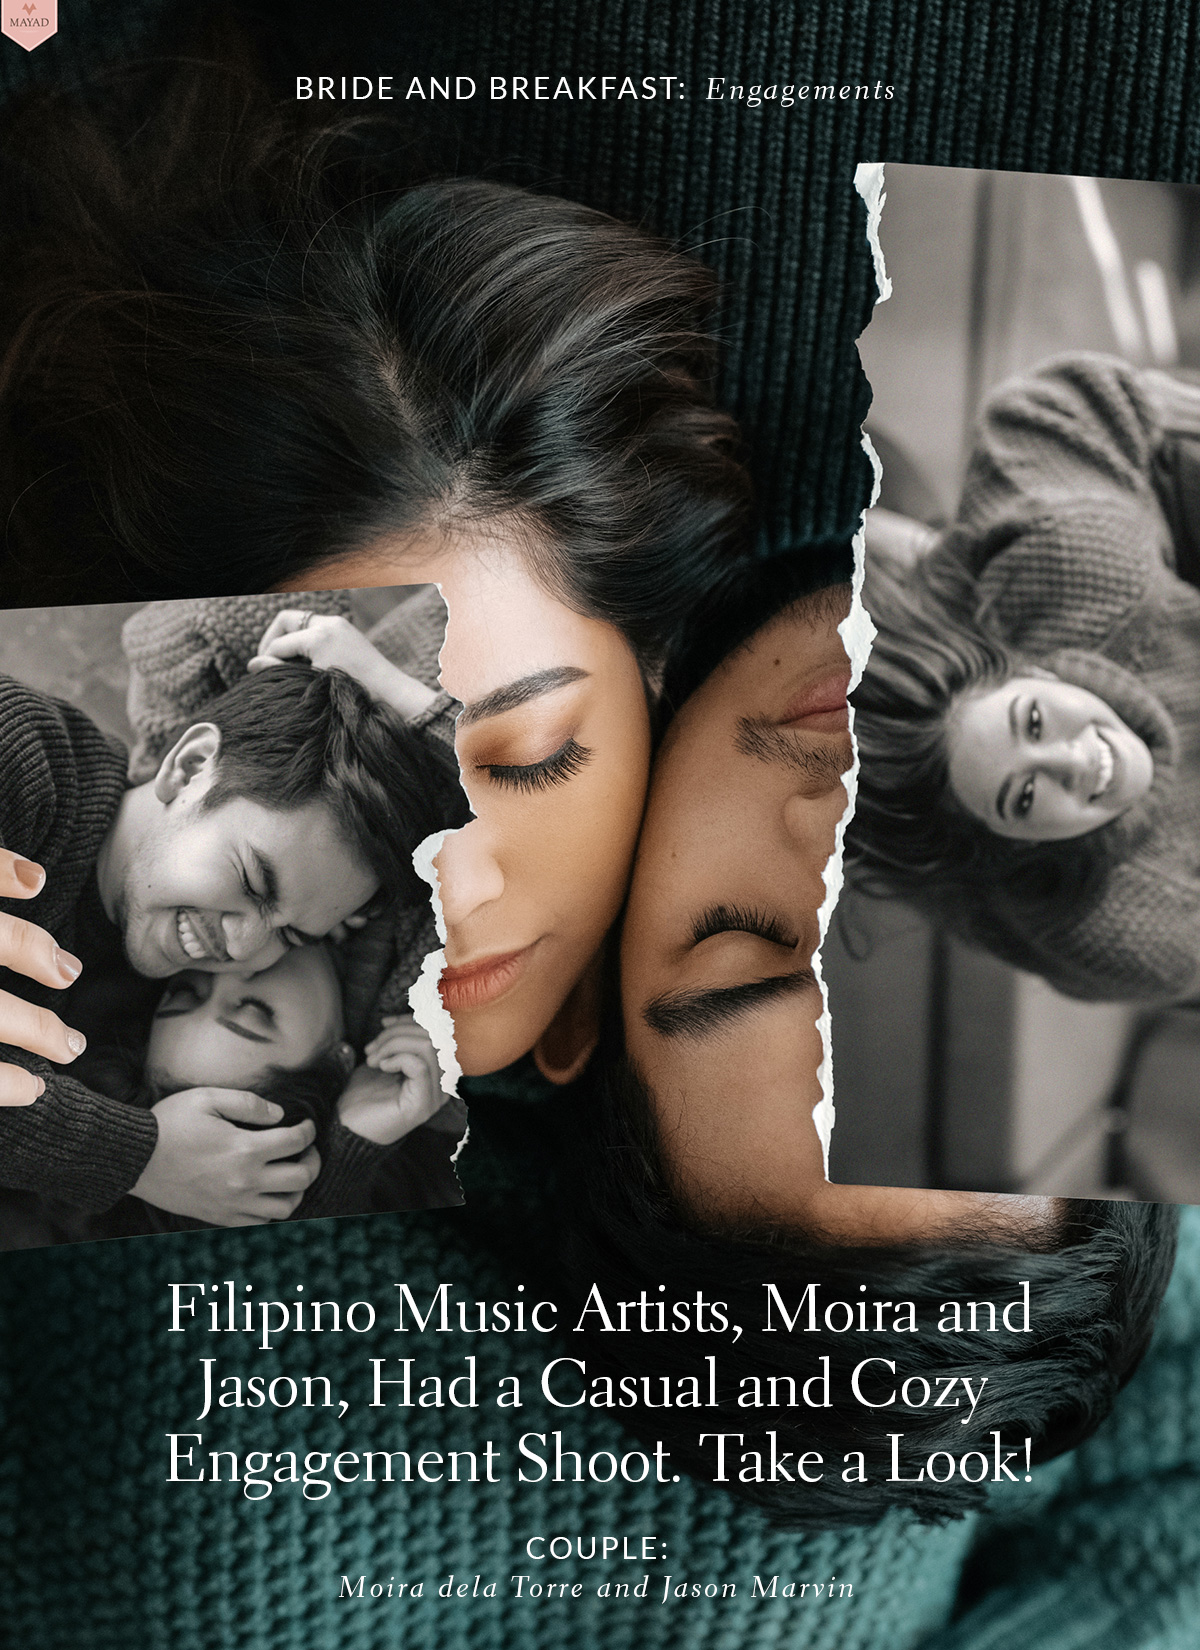 Filipino Music Artists, Moira and Jason, Had a Casual and Cozy Engagement Shoot. Take a Look!